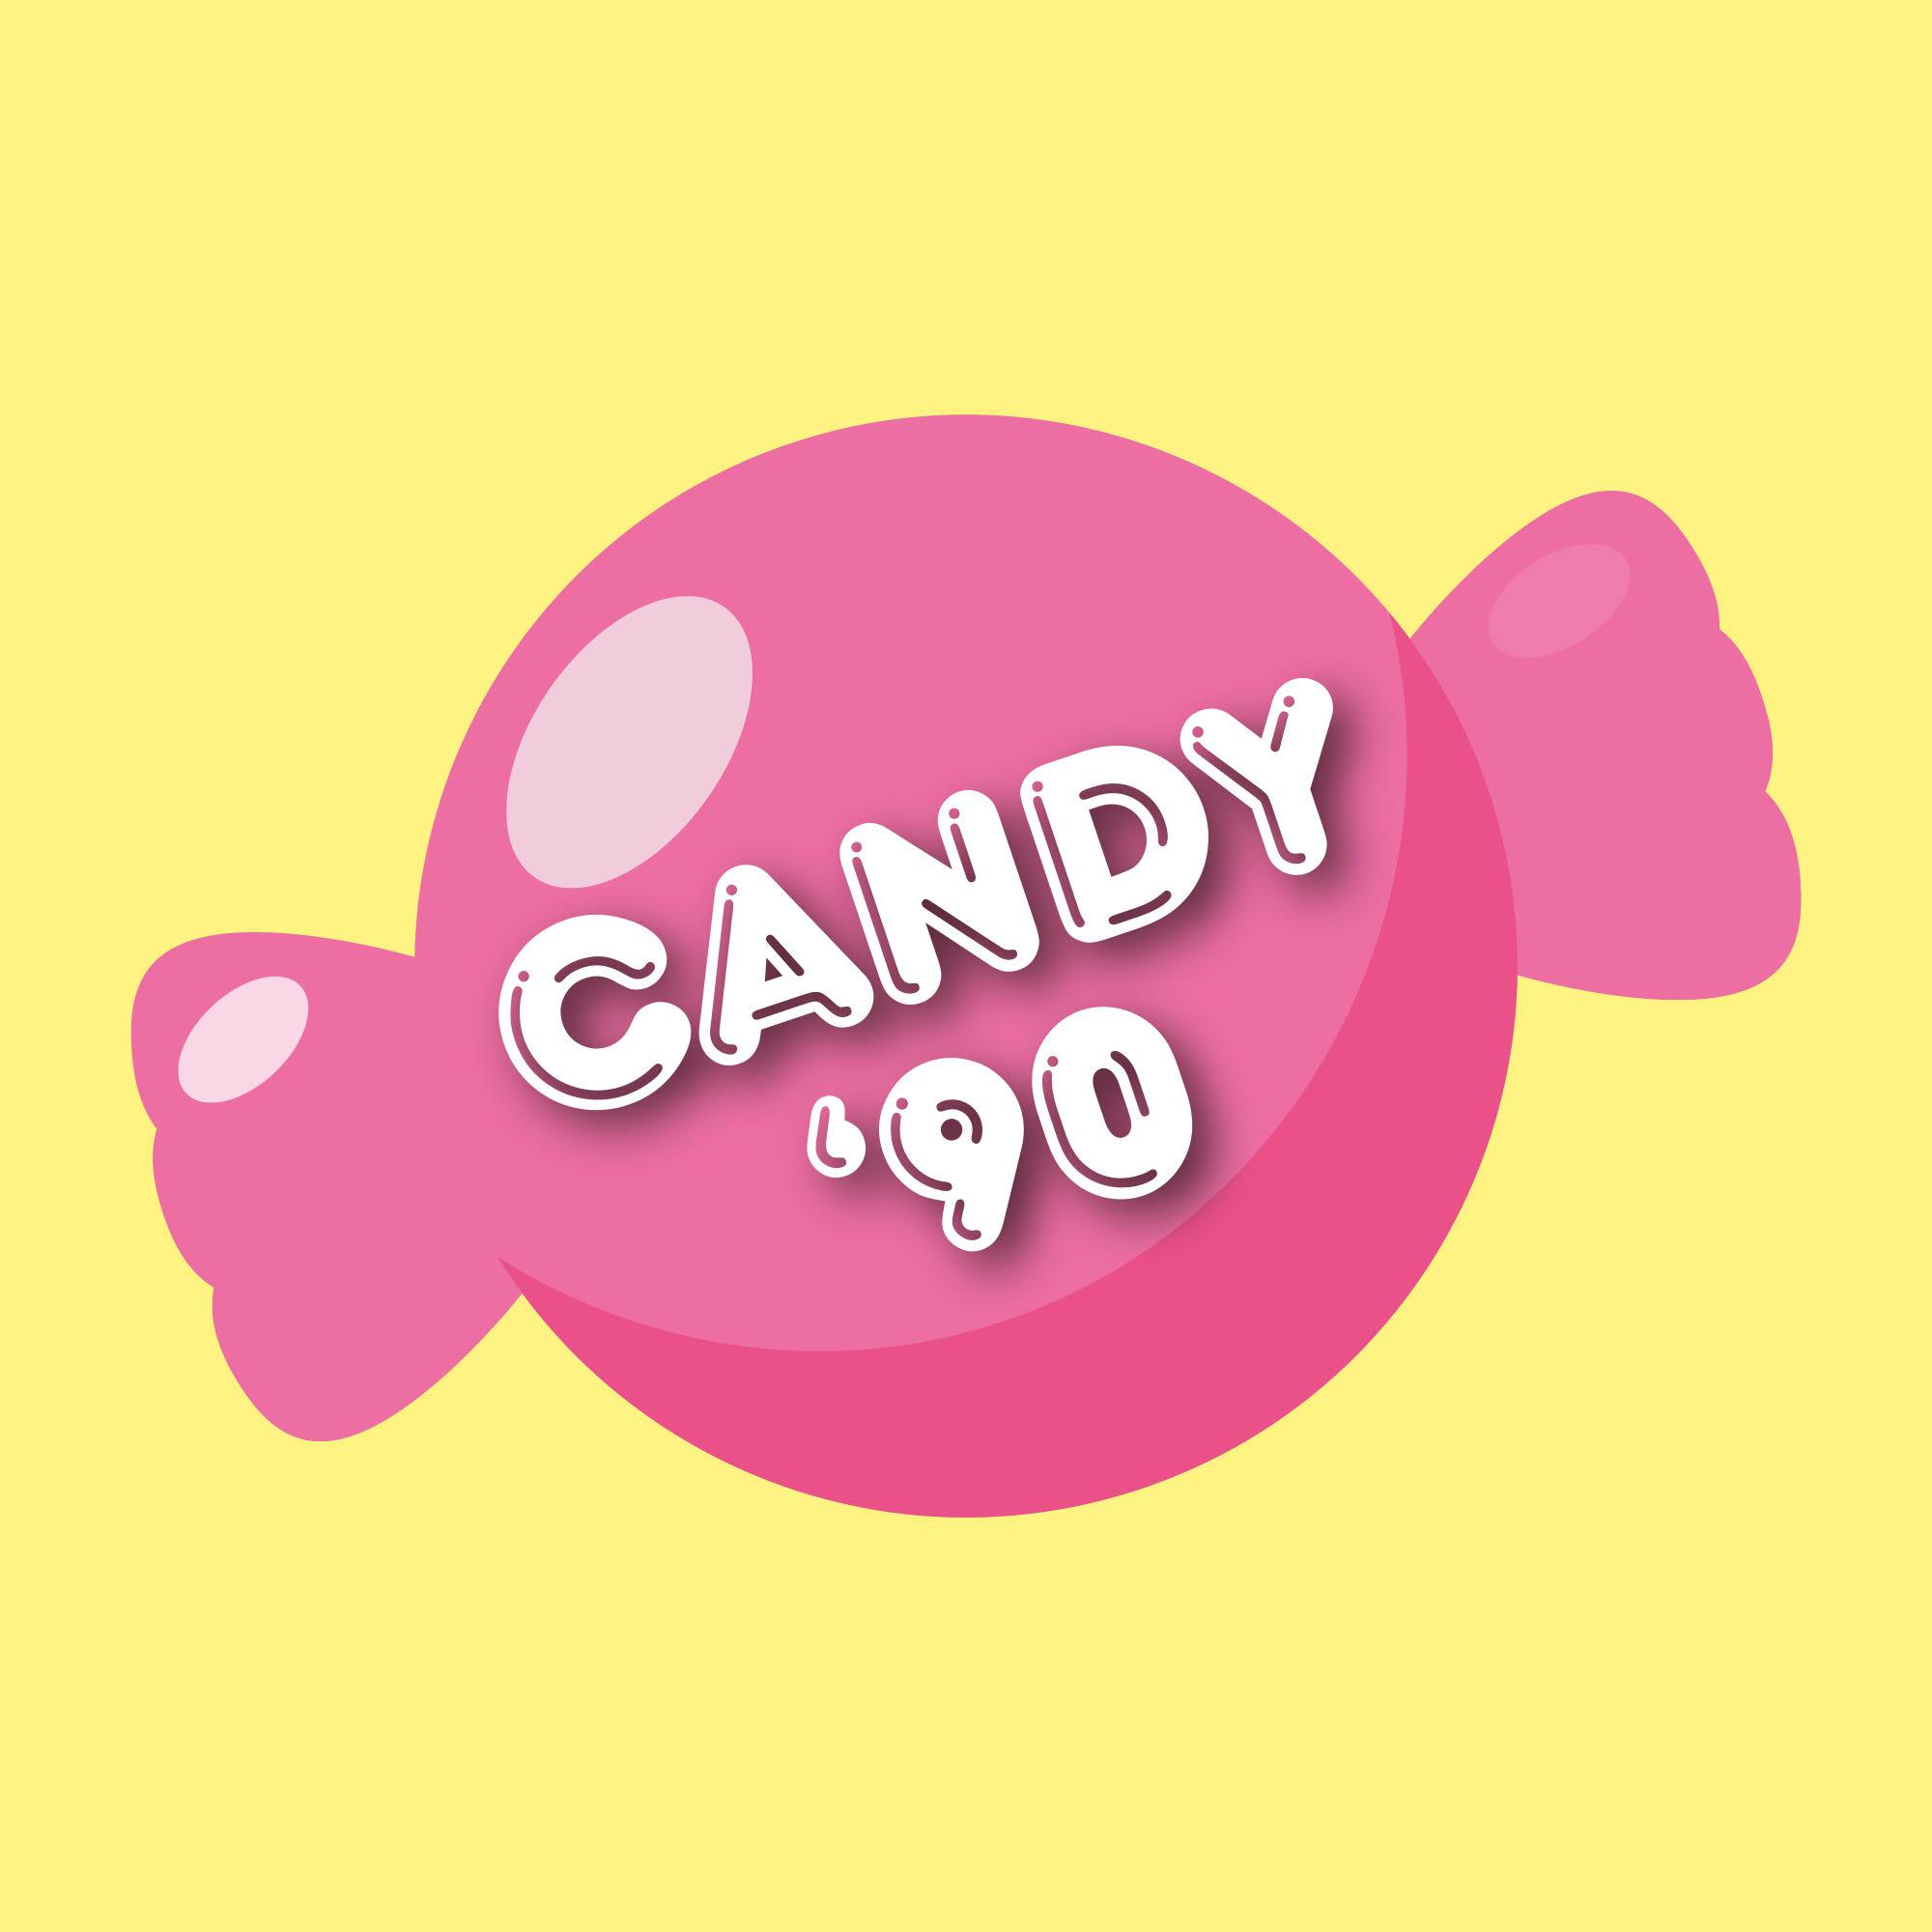 90 Candy Recensione